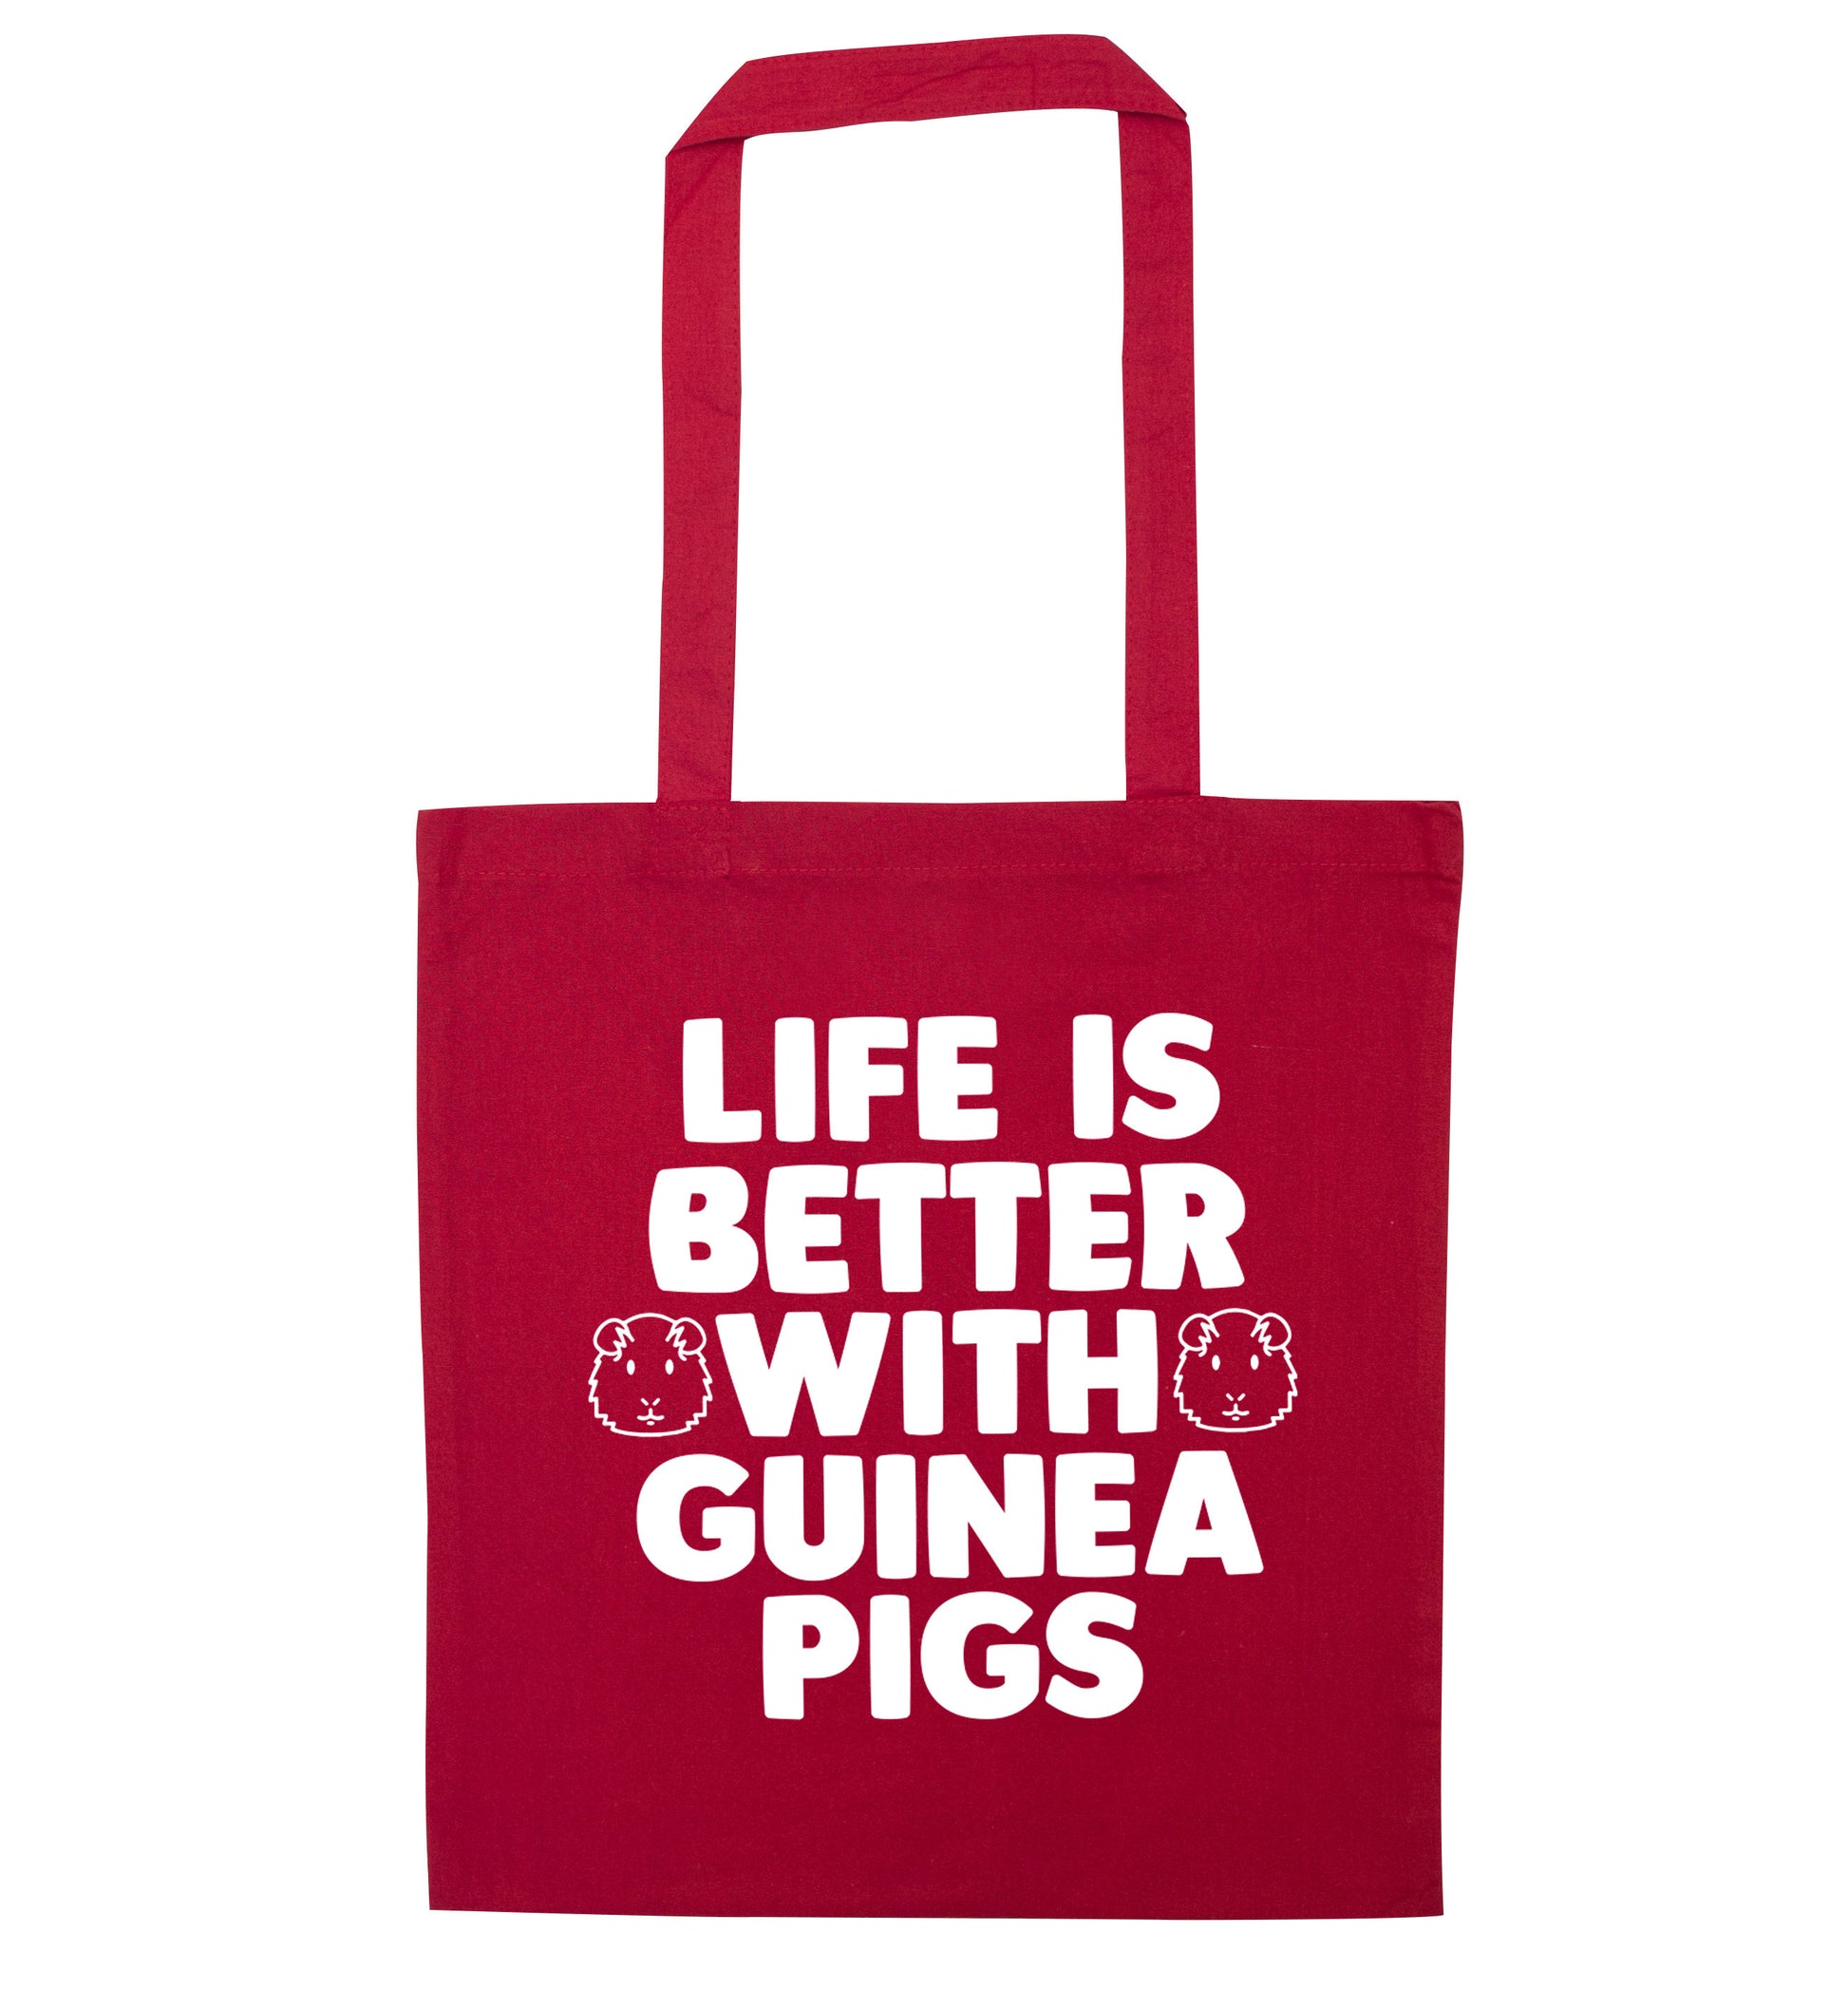 Life is better with guinea pigs red tote bag